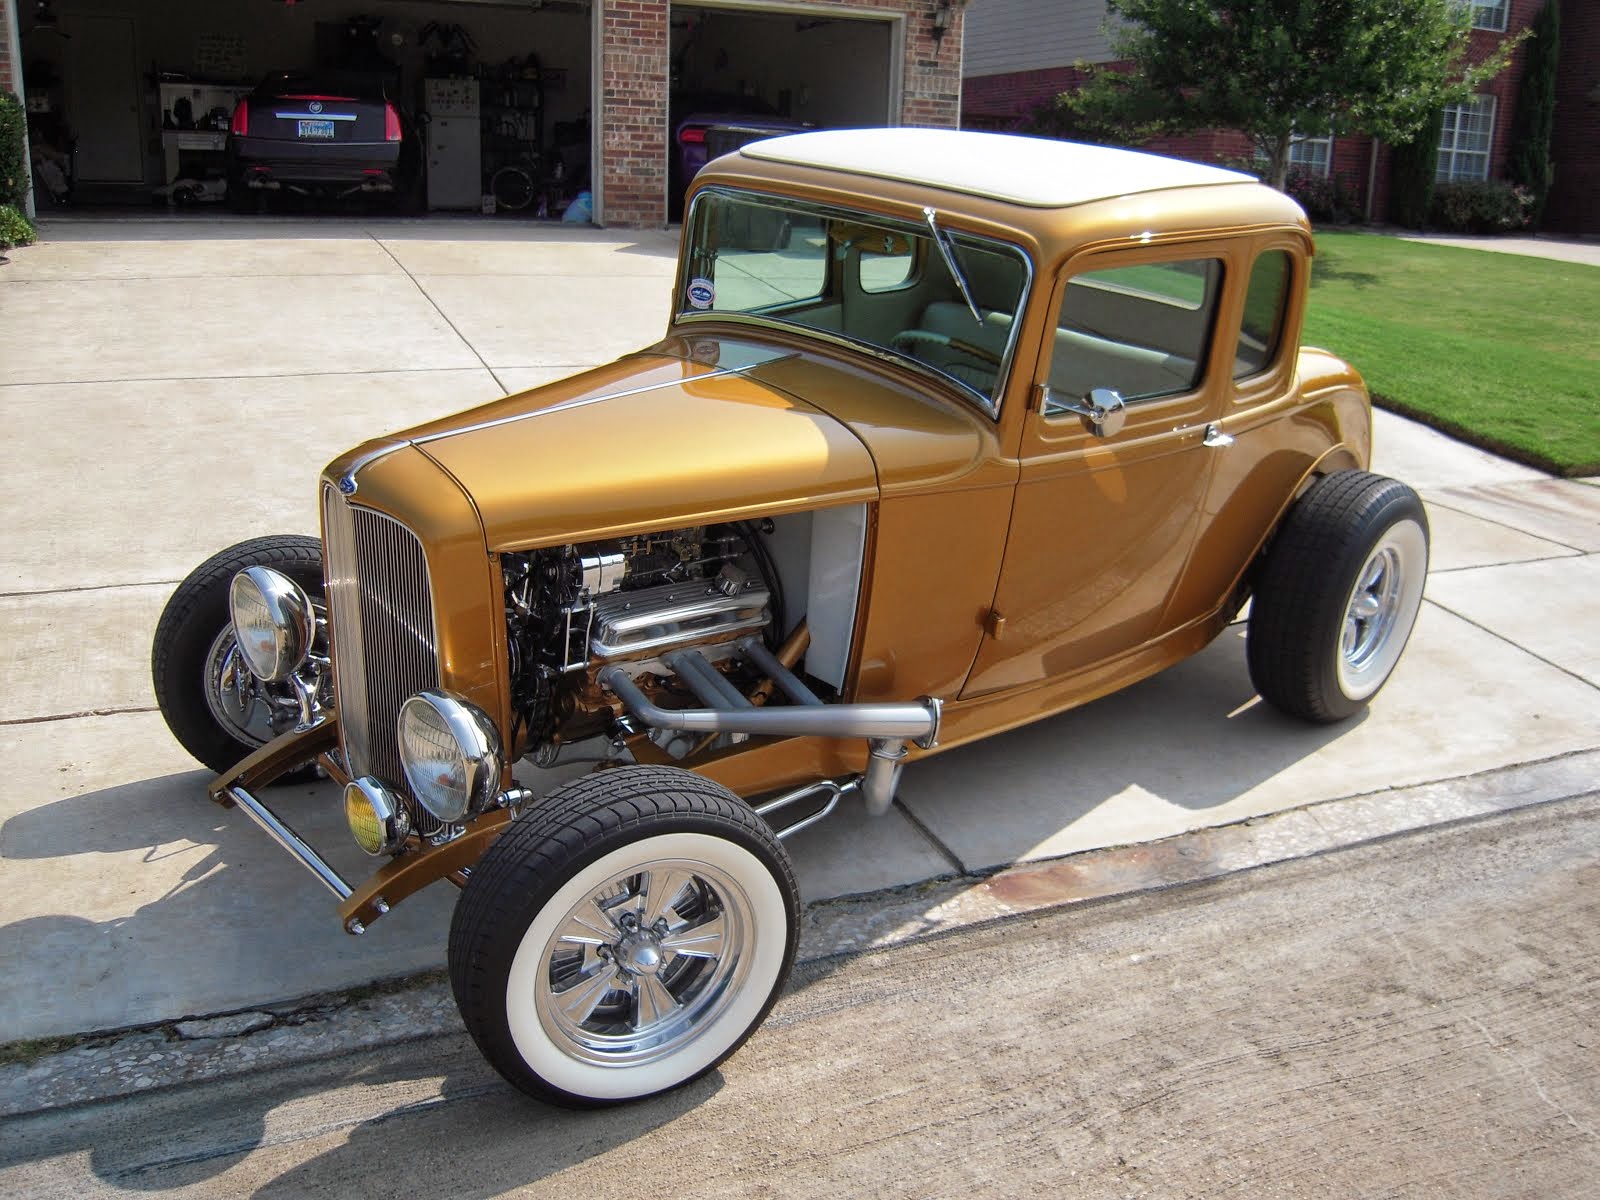 My old 1932 Ford Five Window Coupe